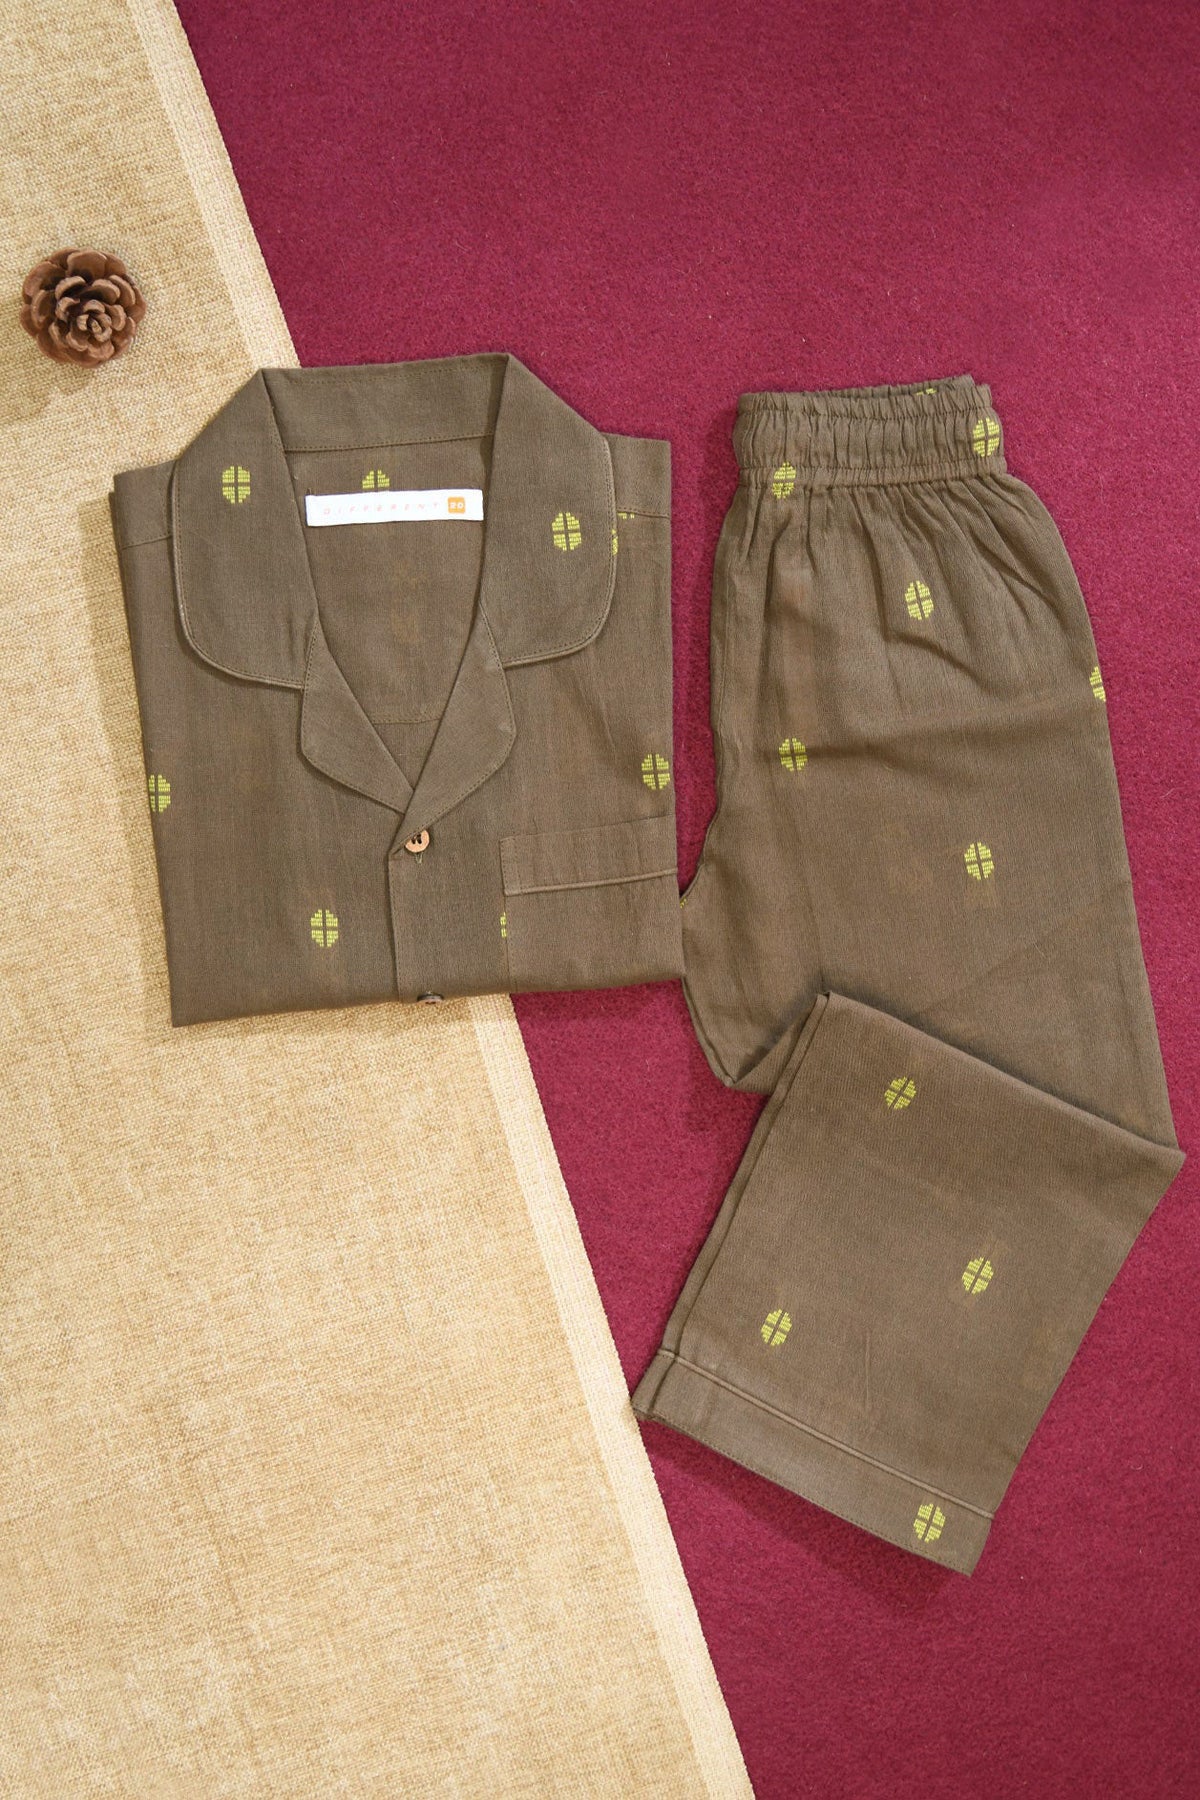 Camp Collar Shirt And Pant Set Kids Night Suit In Taupe Grey Dobby Cotton